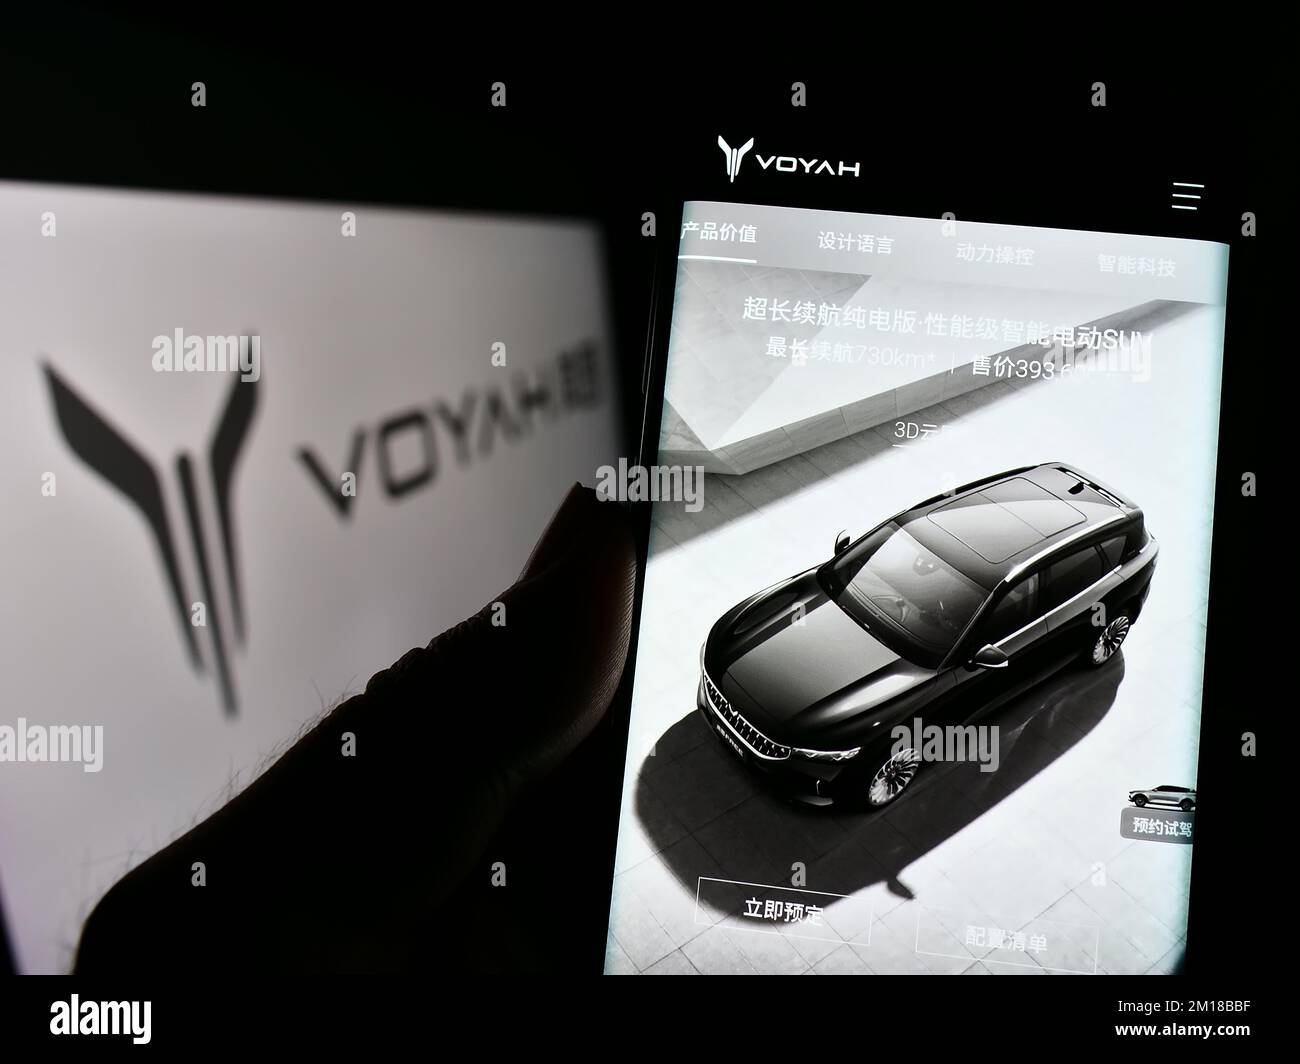 Person holding cellphone with website of Chinese luxury car manufacturer Voyah on screen in front of logo. Focus on center of phone display. Stock Photo